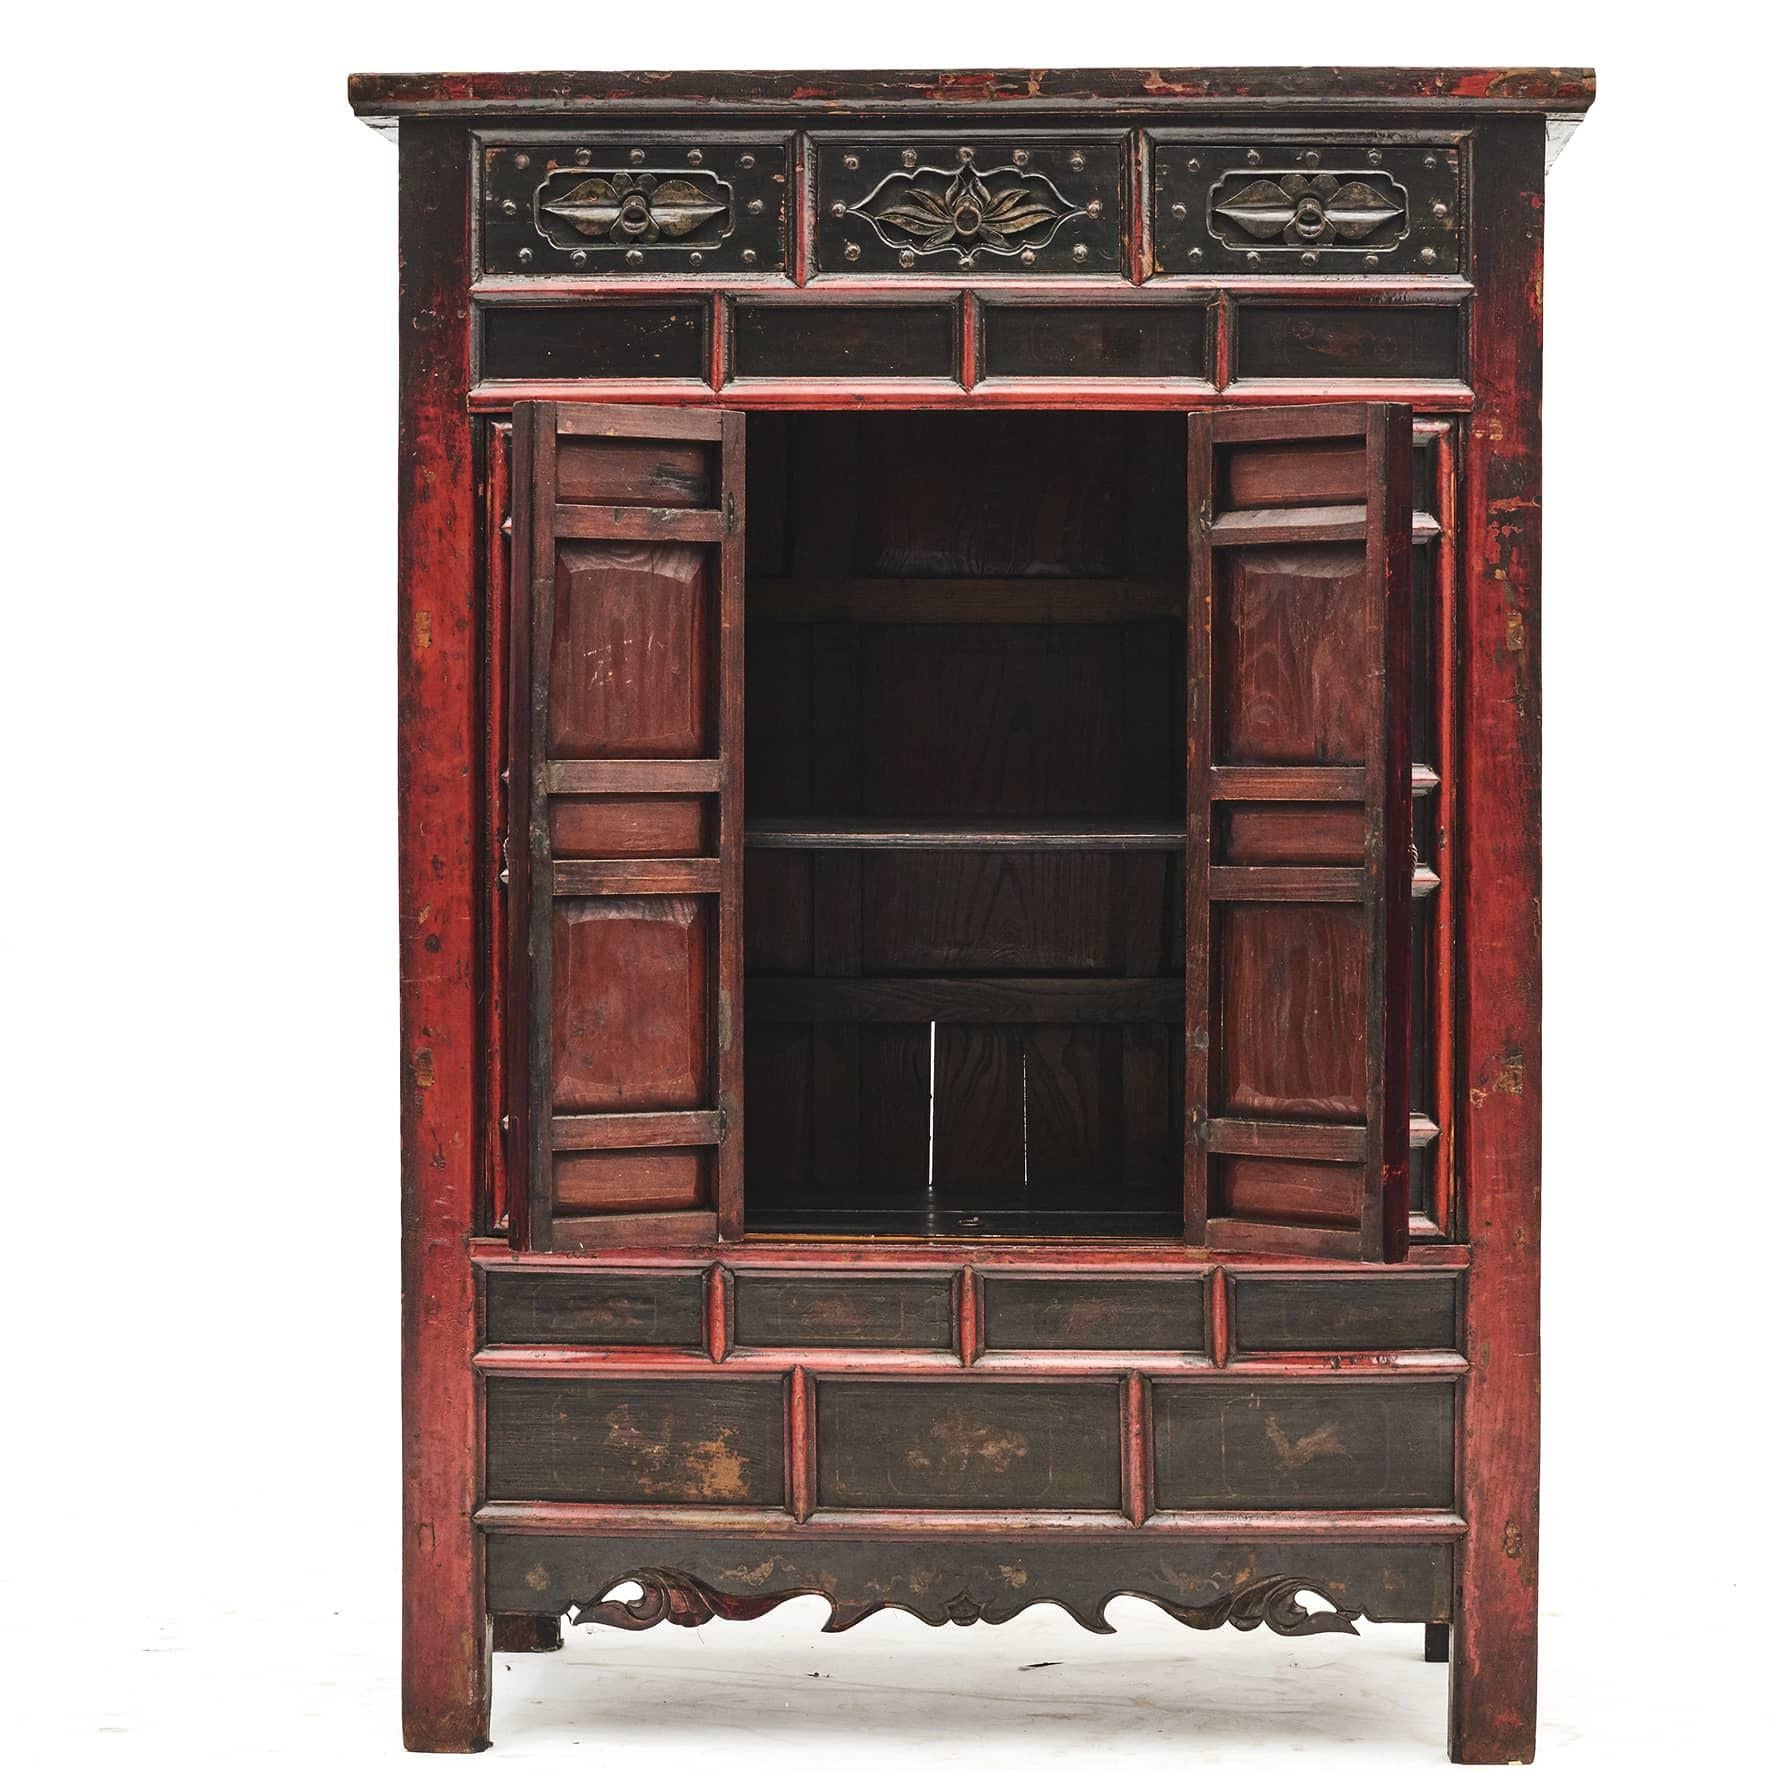 Late 18th century cabinet from Shanxi, China.
Original red and black lacquer with a light clear surface finish, which highlights the lovely natural patina.
Pair of bi-fold doors with decorations and 3 drawers with carvings on top.
Original